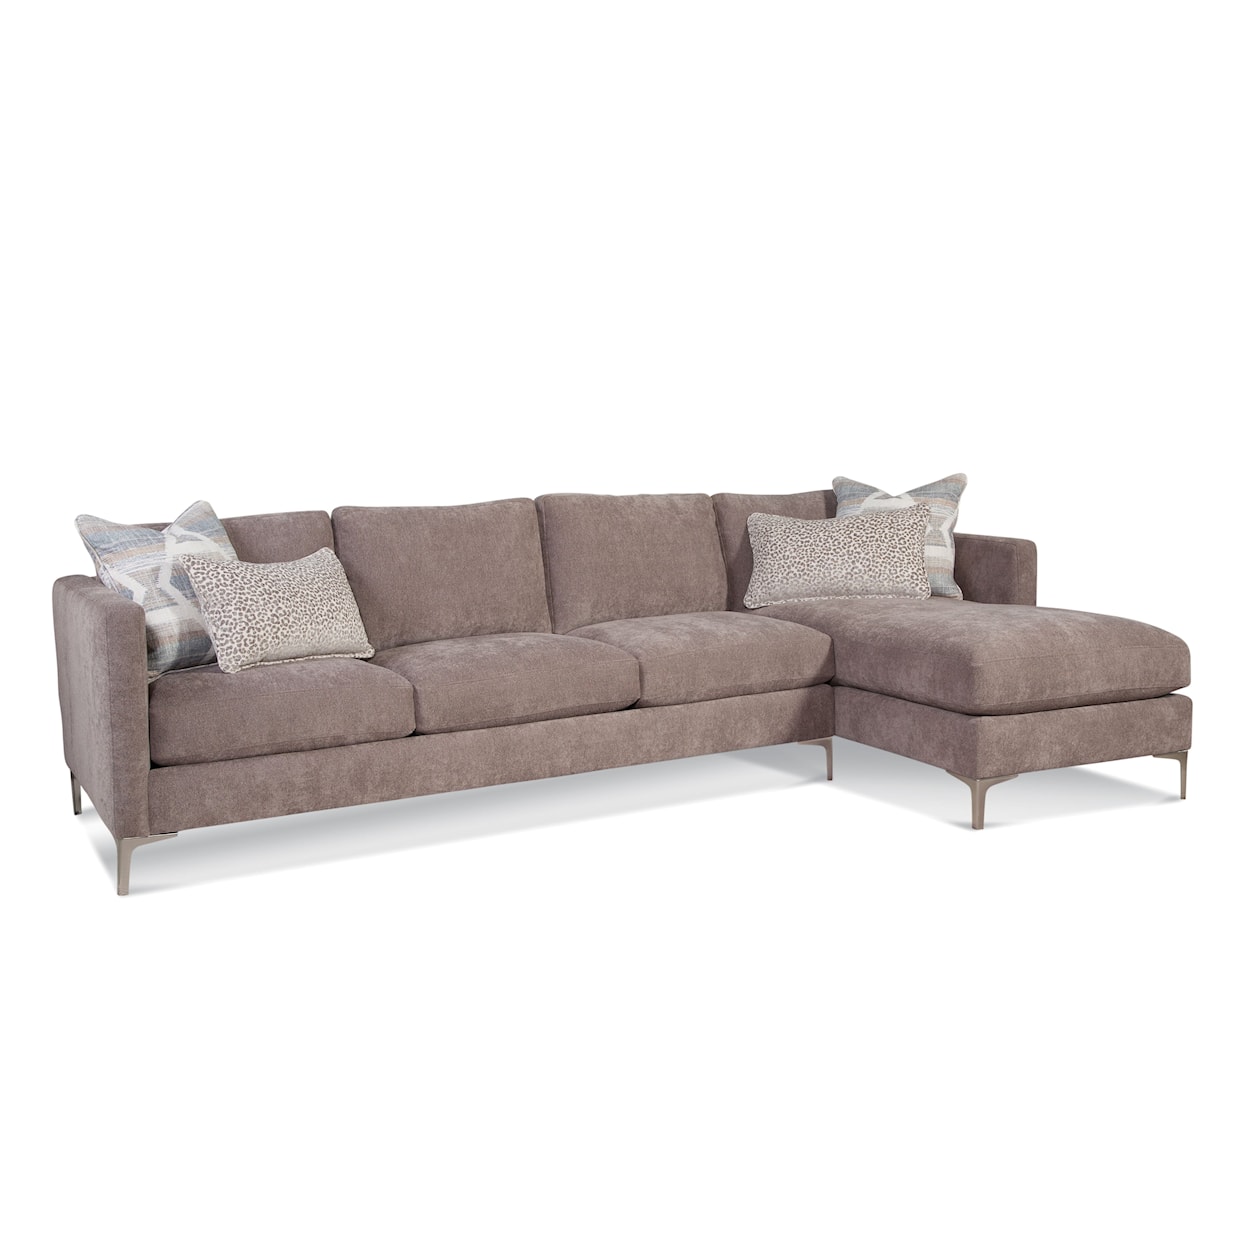 Braxton Culler Lenox Lenox Chaise Sectional with Metal Legs